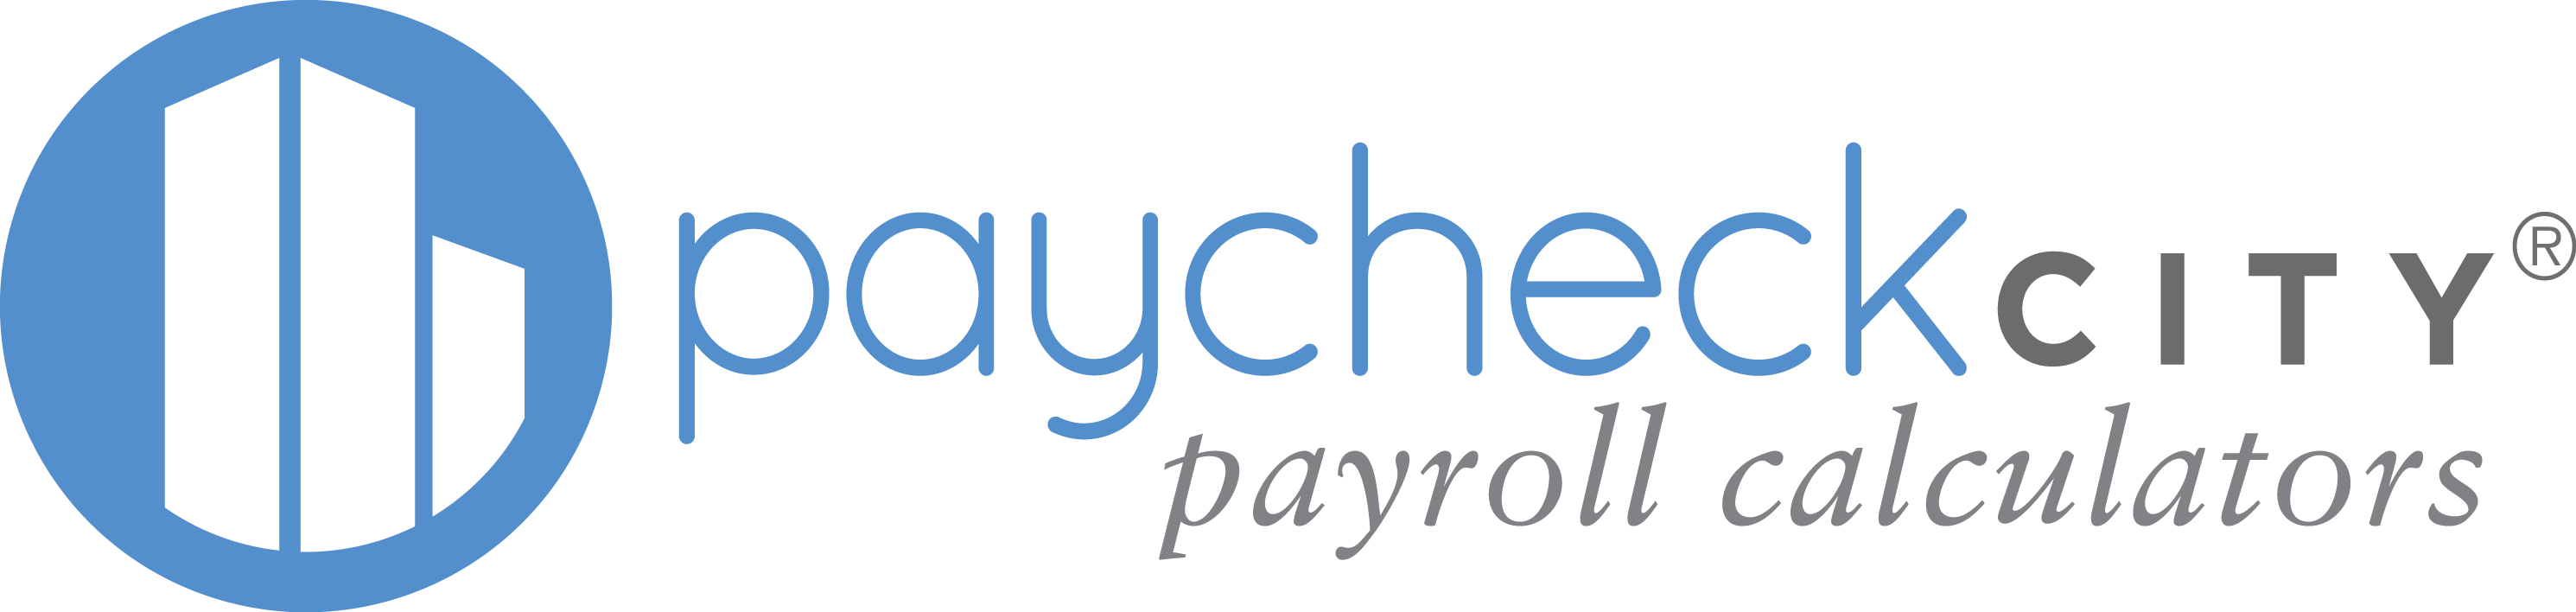 paycheckcity-announces-online-payroll-calculators-ready-to-compute-2015